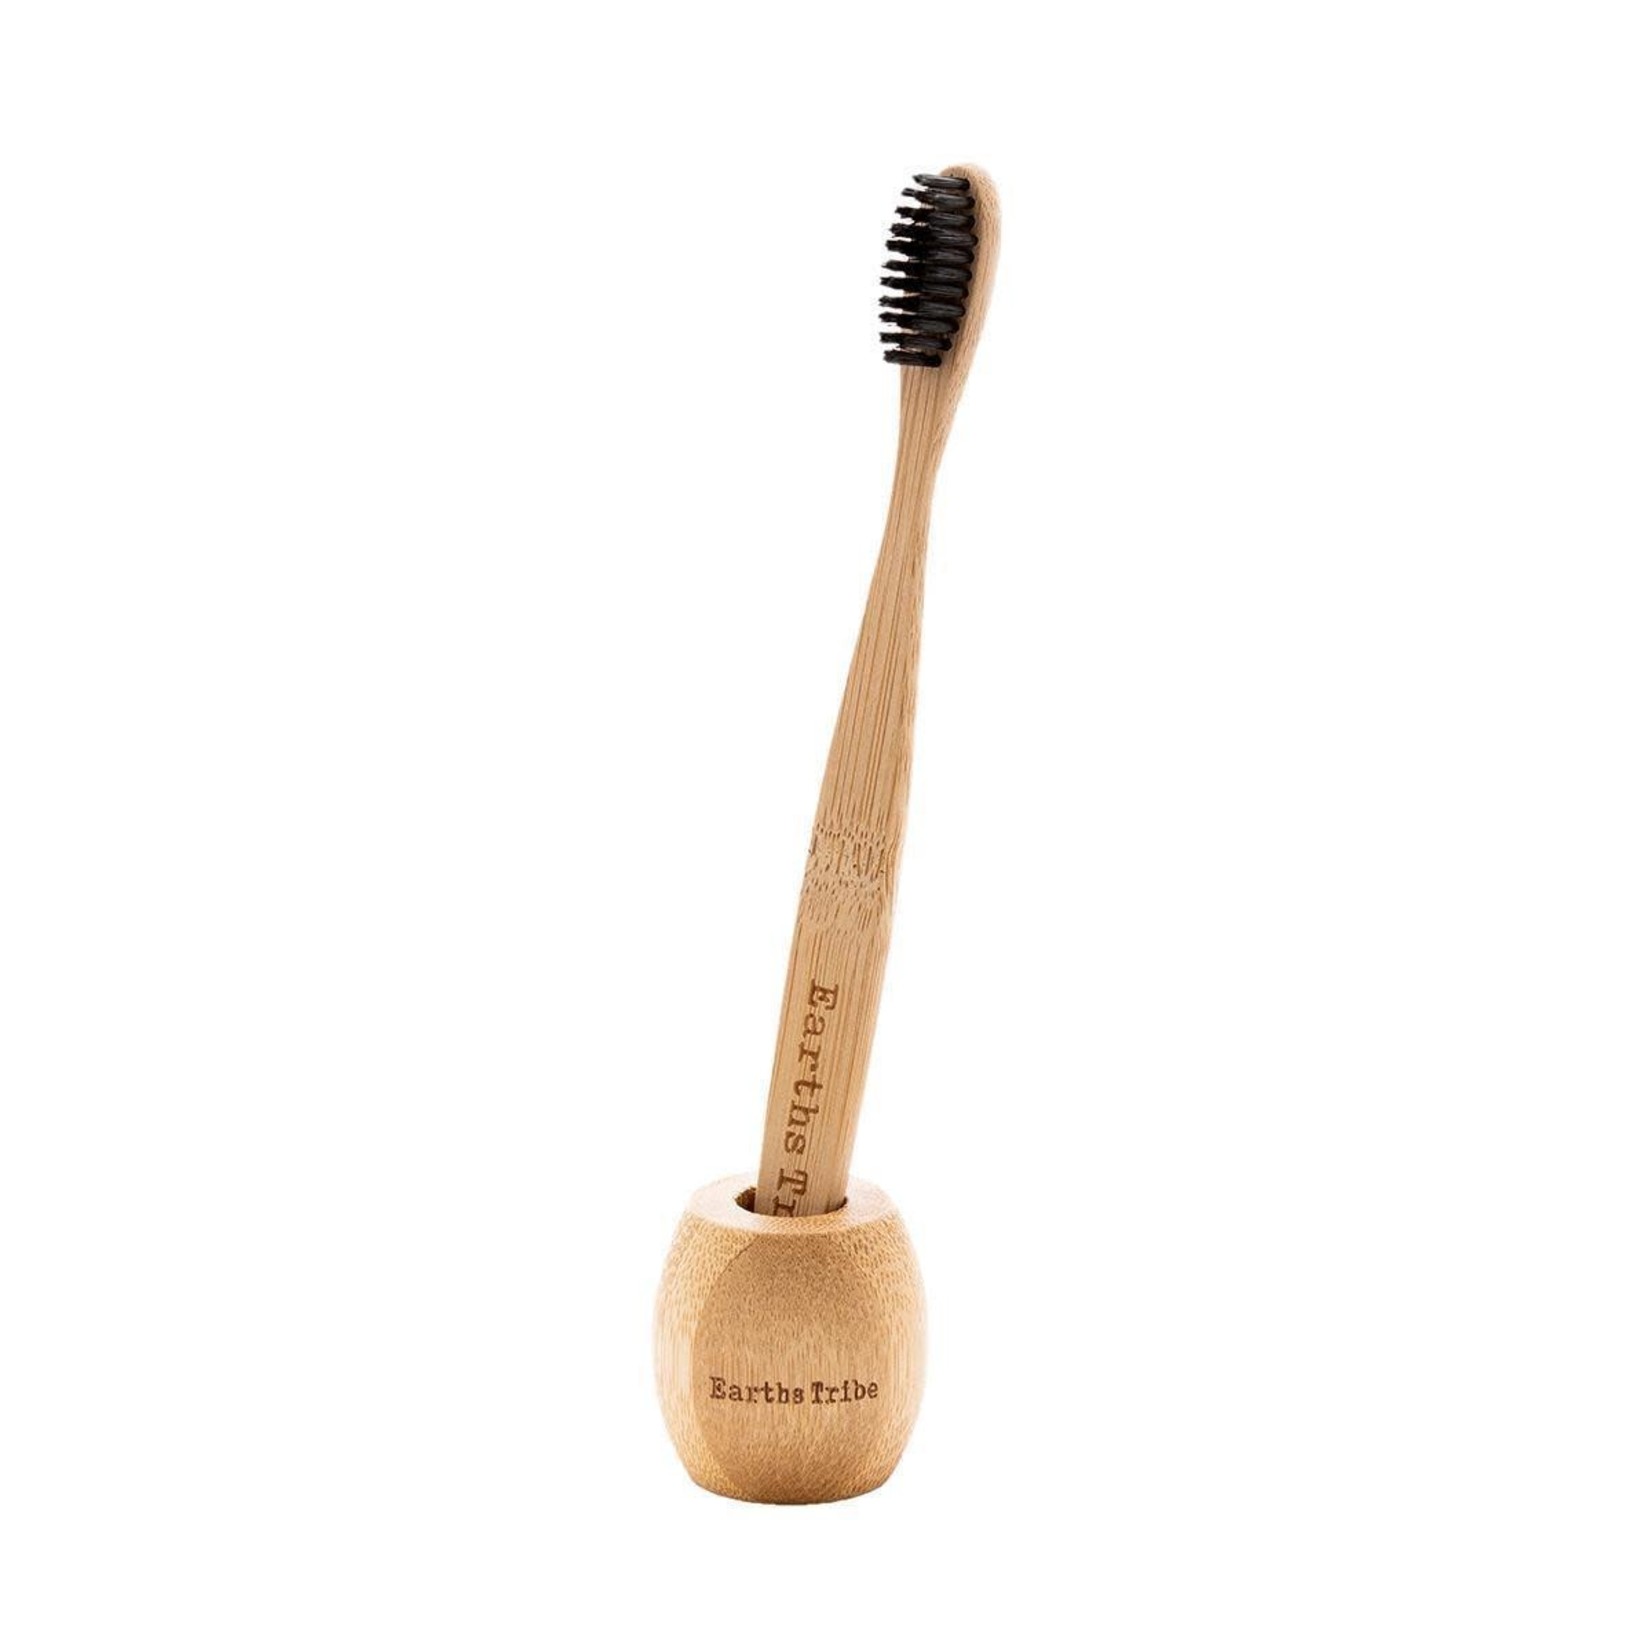 Earths Tribe Bamboo Toothbrush Stand